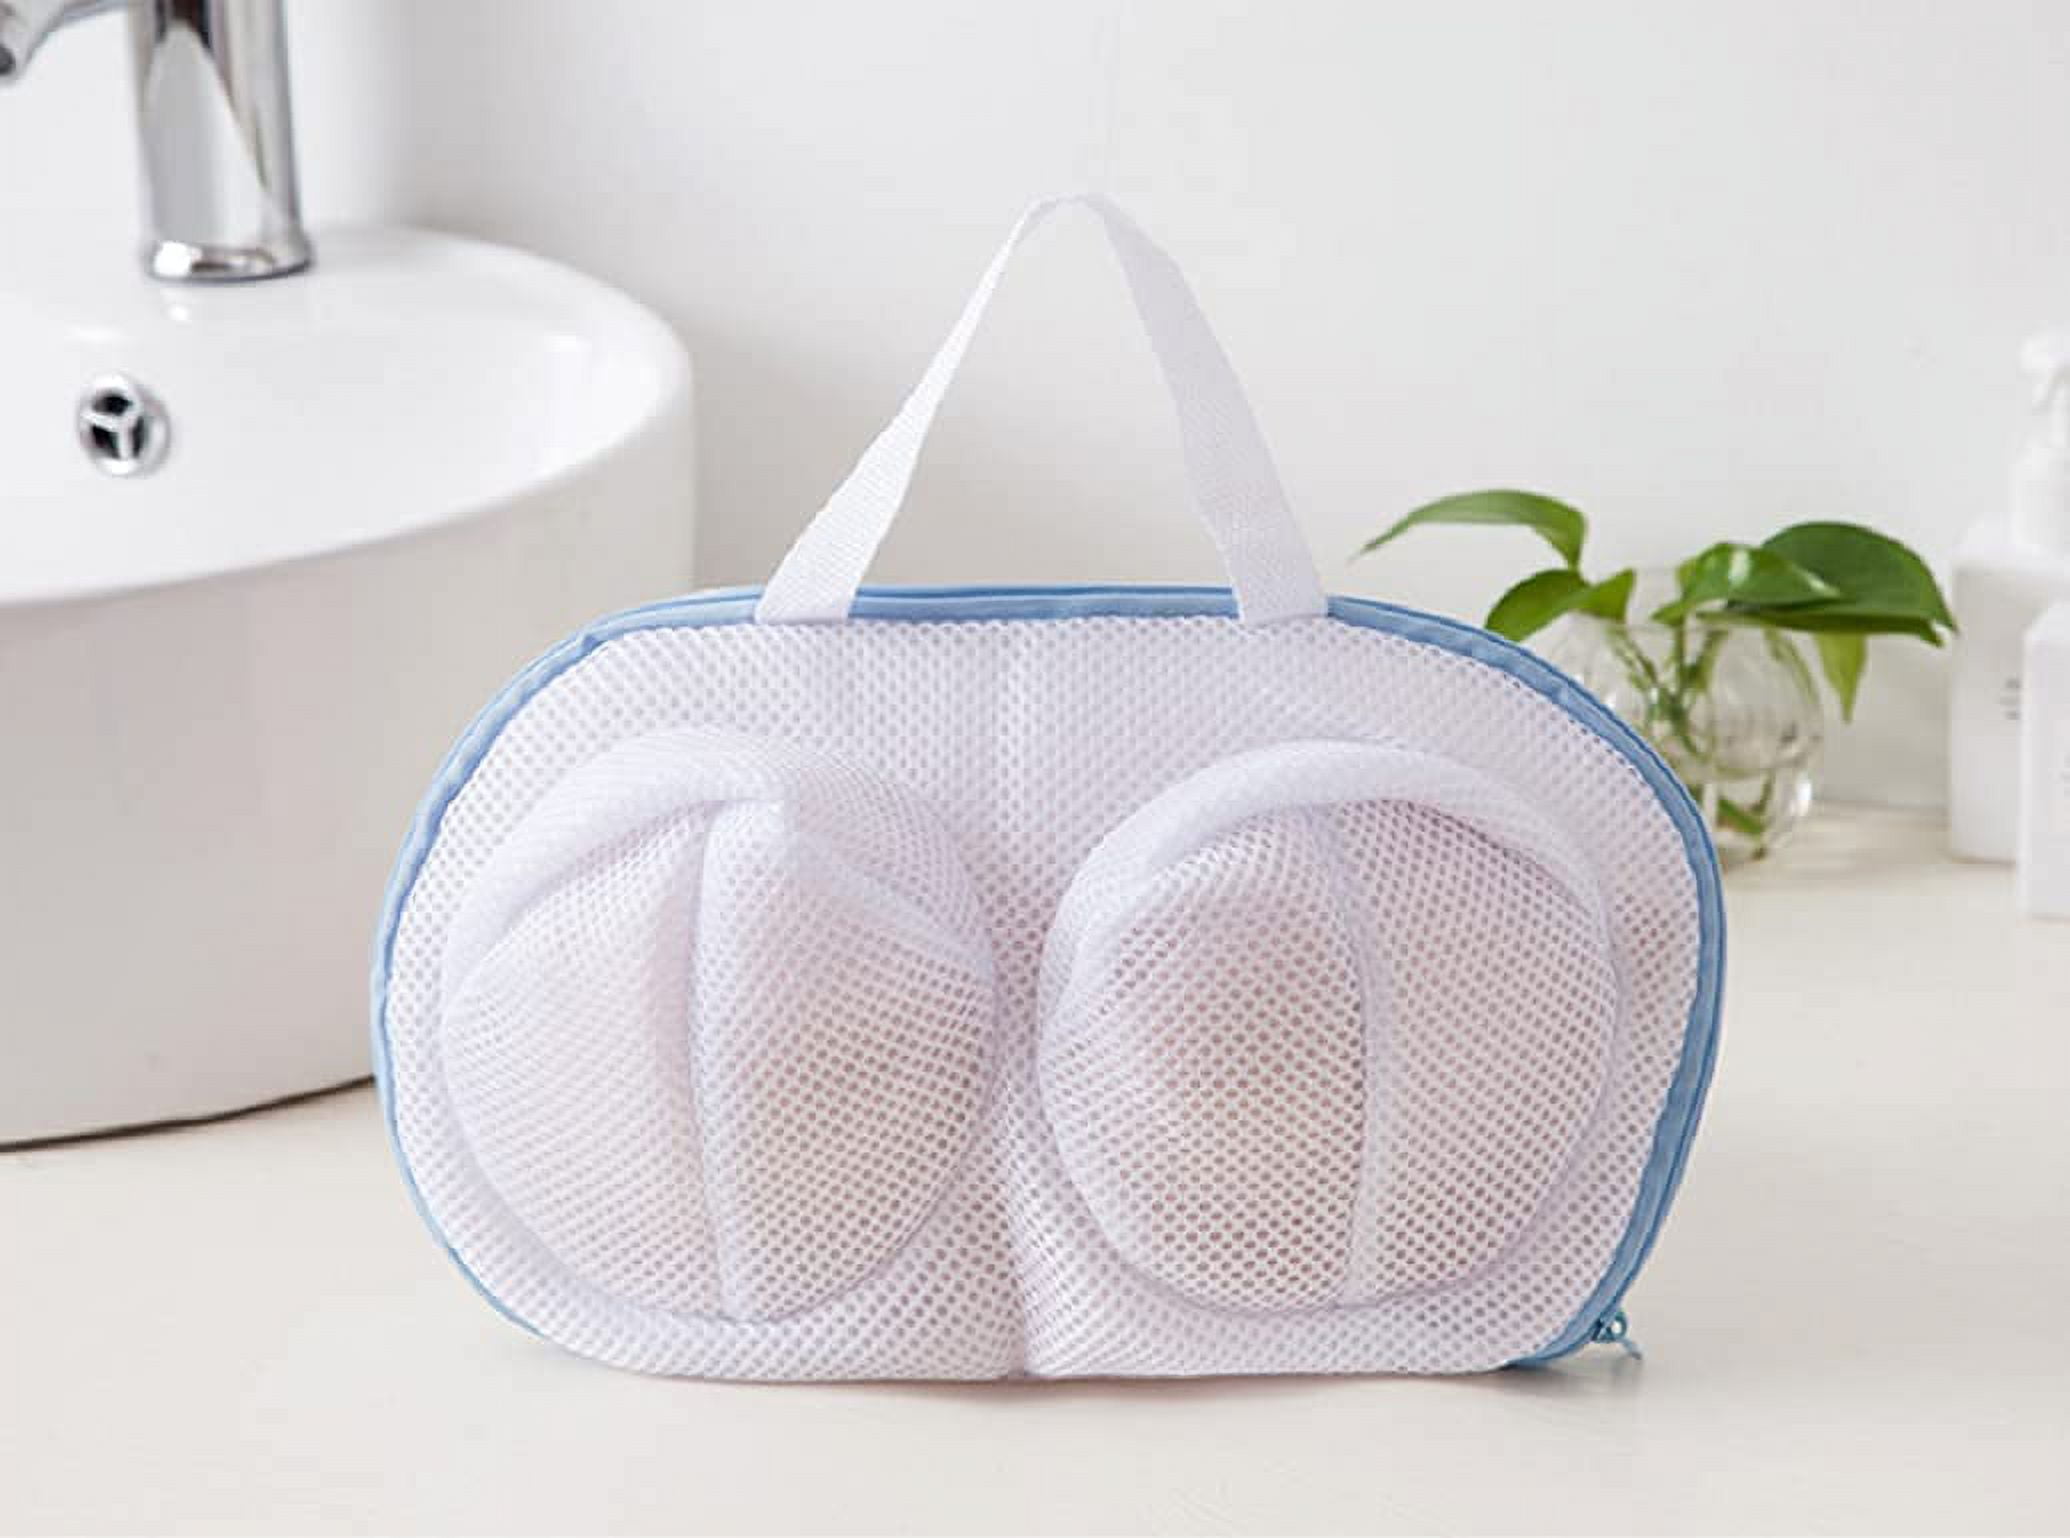 Large Mesh Lingerie Bags for Laundry, Bra Washing Bag for Washing  Machine/Washer, A to G Cup Anti Deformation Bra Bag, Laundry Science  Premium Bra Wash Bag for Bras Lingerie Delicates, 